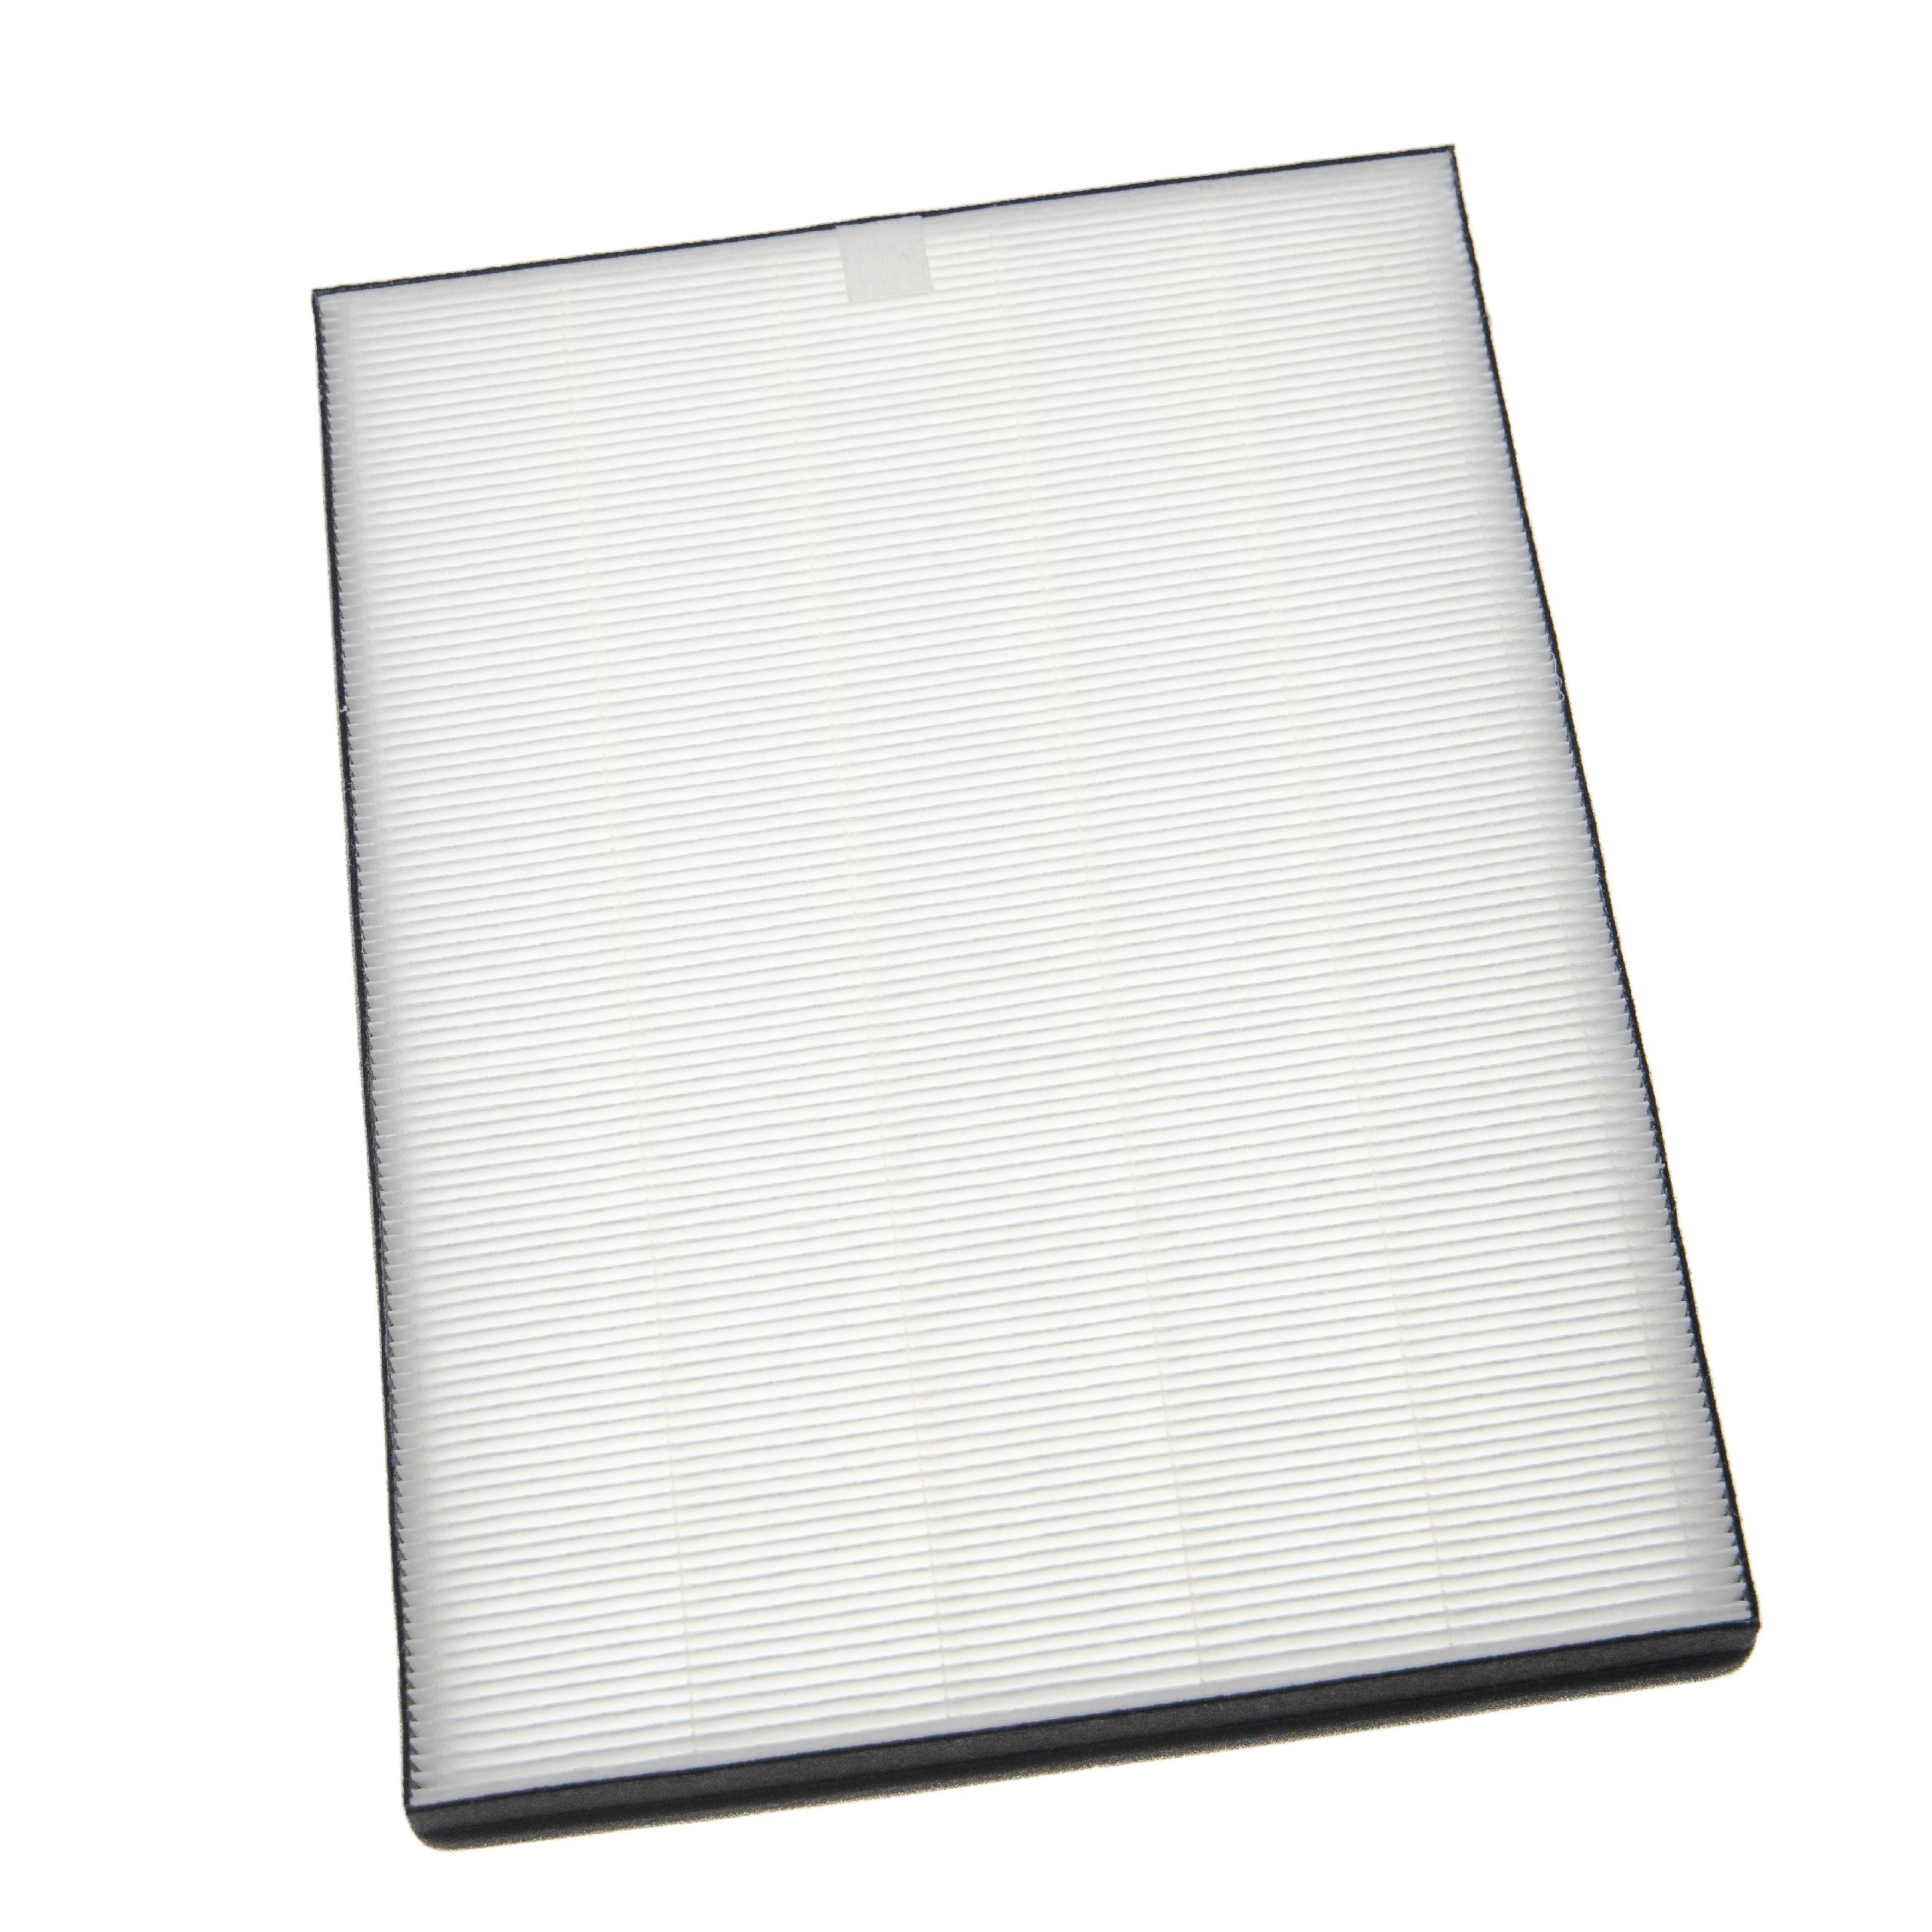 vhbw HEPA Filter Replacement for Philips FY1410/30 for Air Cleaner - Spare Air Filter